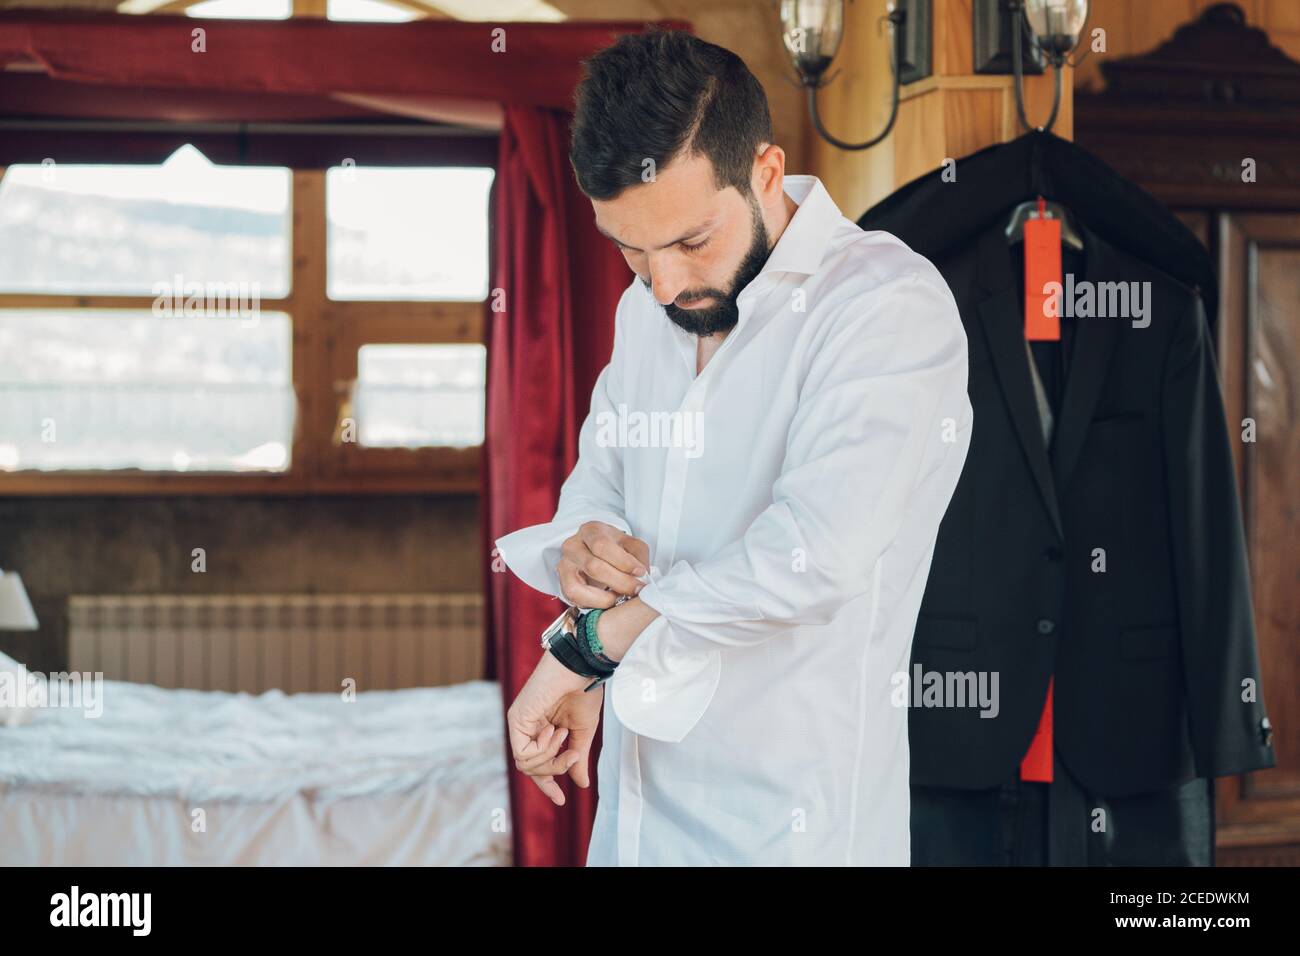 Young handsome man with dark hair and beard putting on white shirt in bedroom with new black costume hanging on clothes hanger Stock Photo